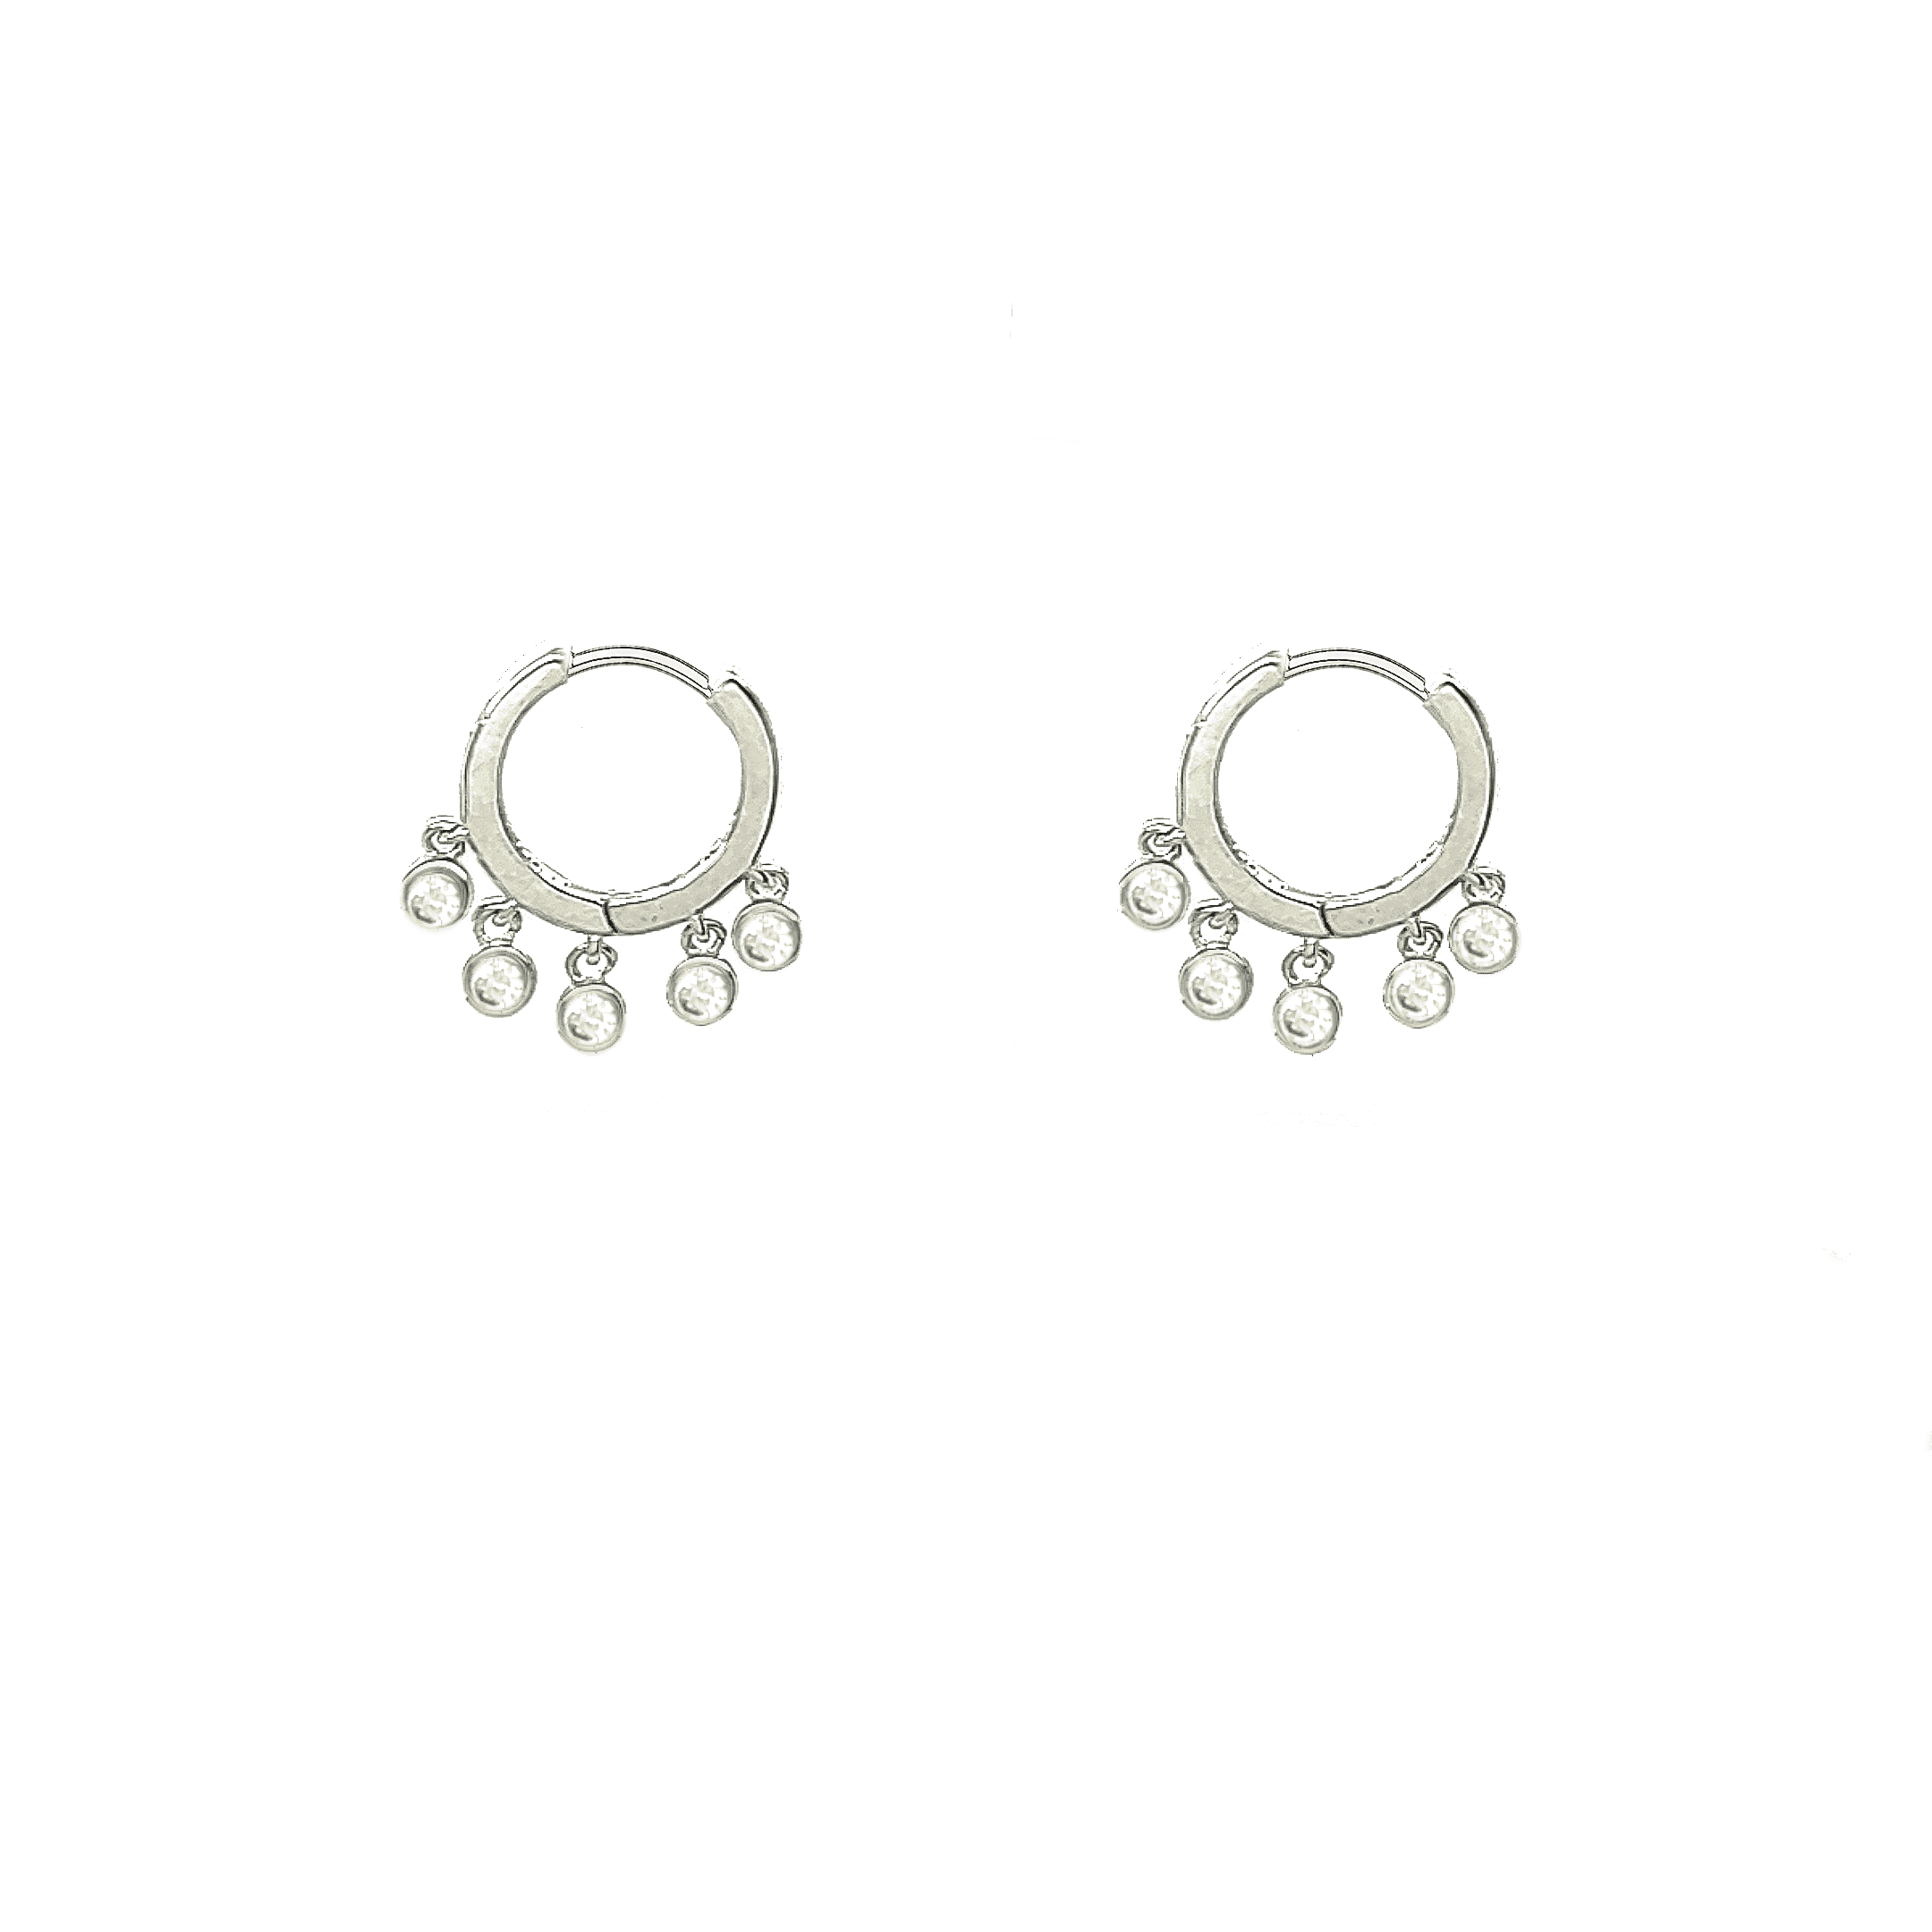 Asfour 925 Sterling Silver Earring - ER0225-W